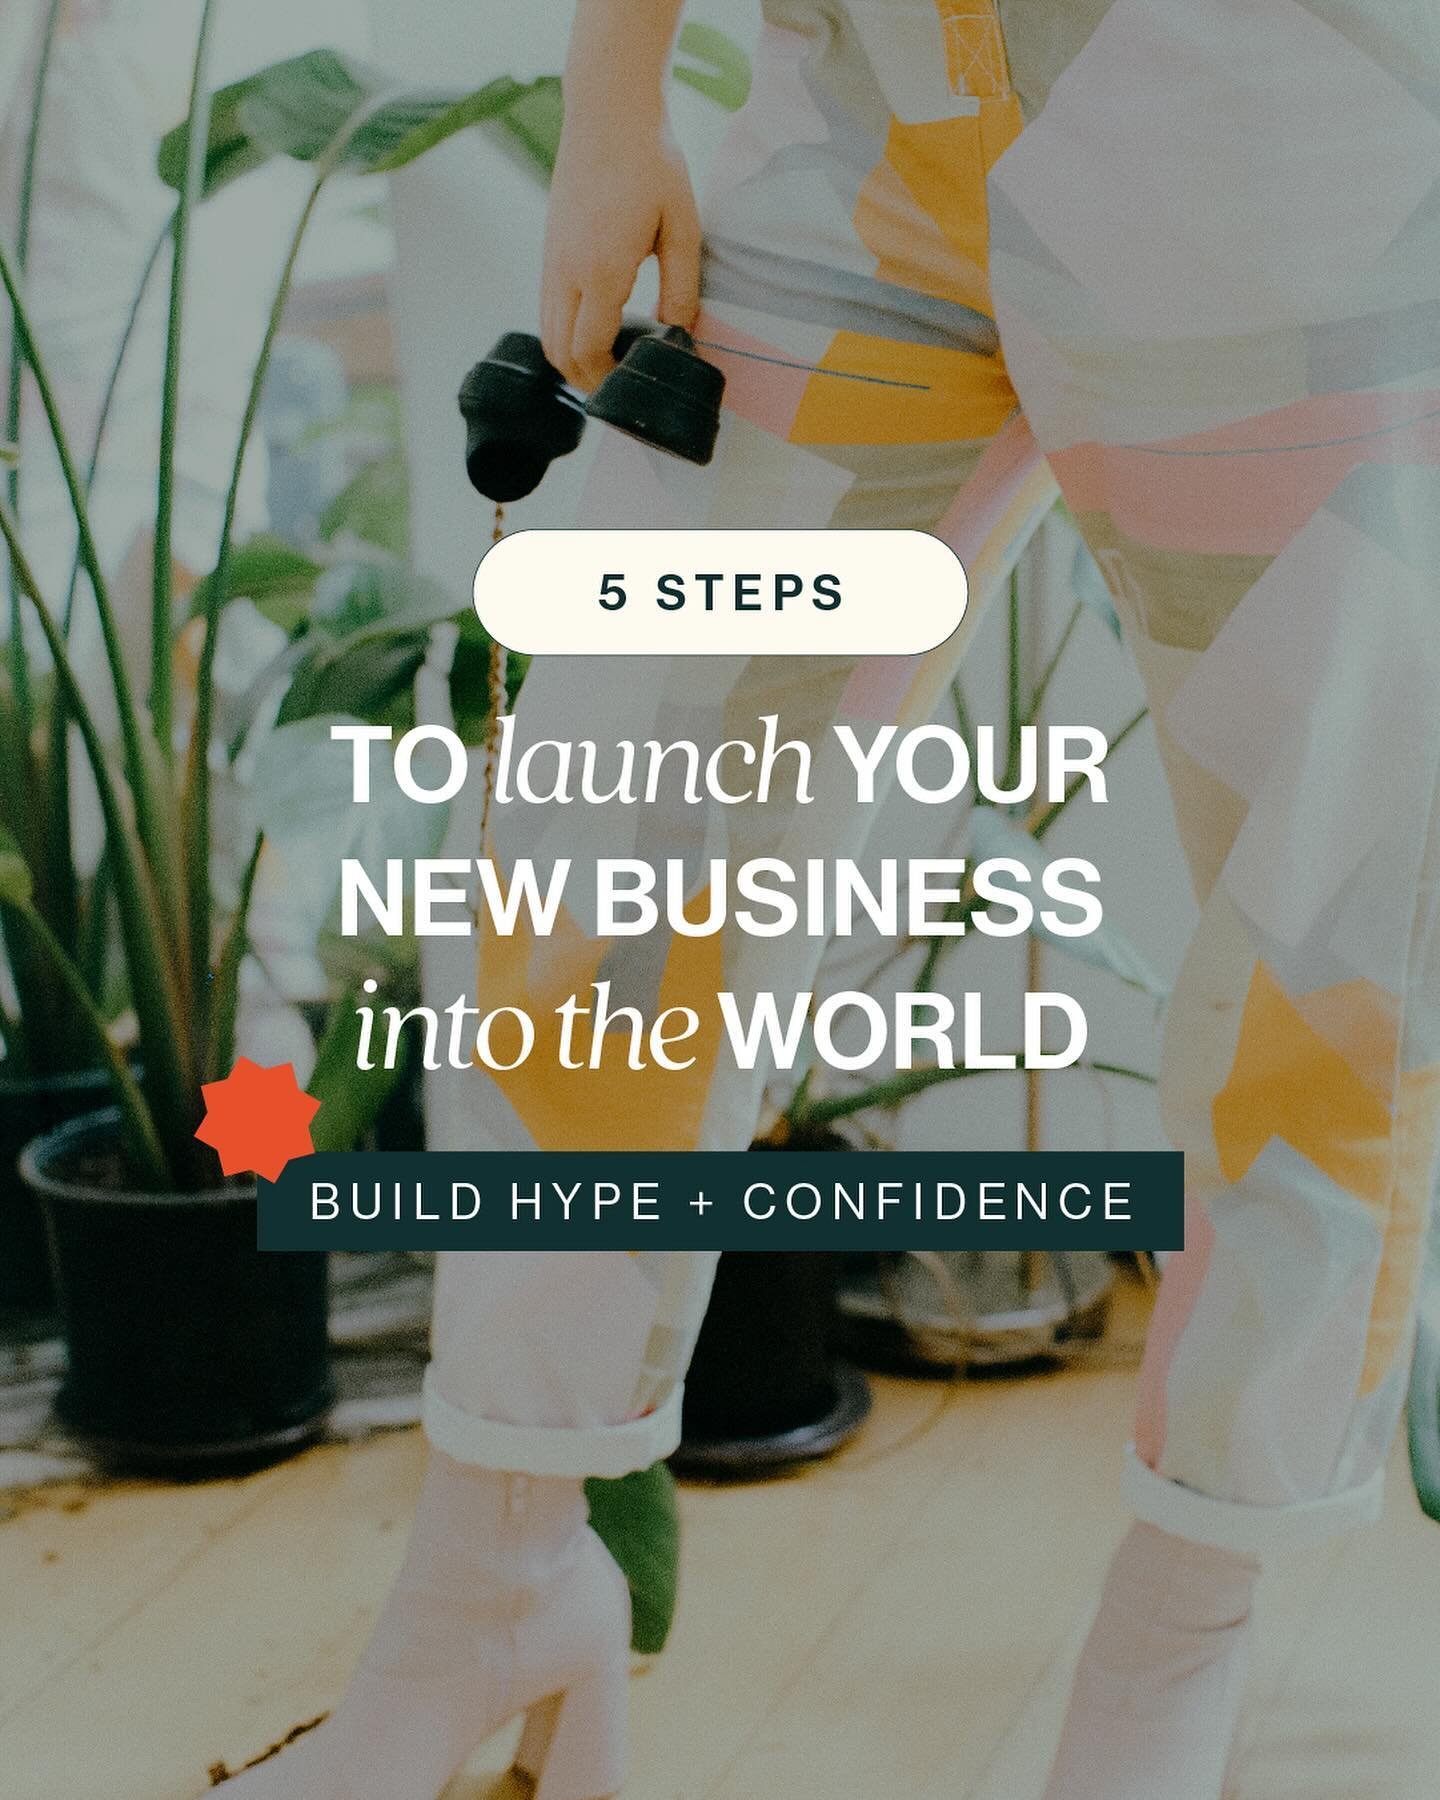 Feeling stuck with HOW to launch your business? 

It can feel so overwhelming to put your business baby out into the world 🤯

That&rsquo;s why I&rsquo;ve made a handy 5-step checklist for you to&hellip; 

✨ build hype
✨ gain confidence 
✨ and launch